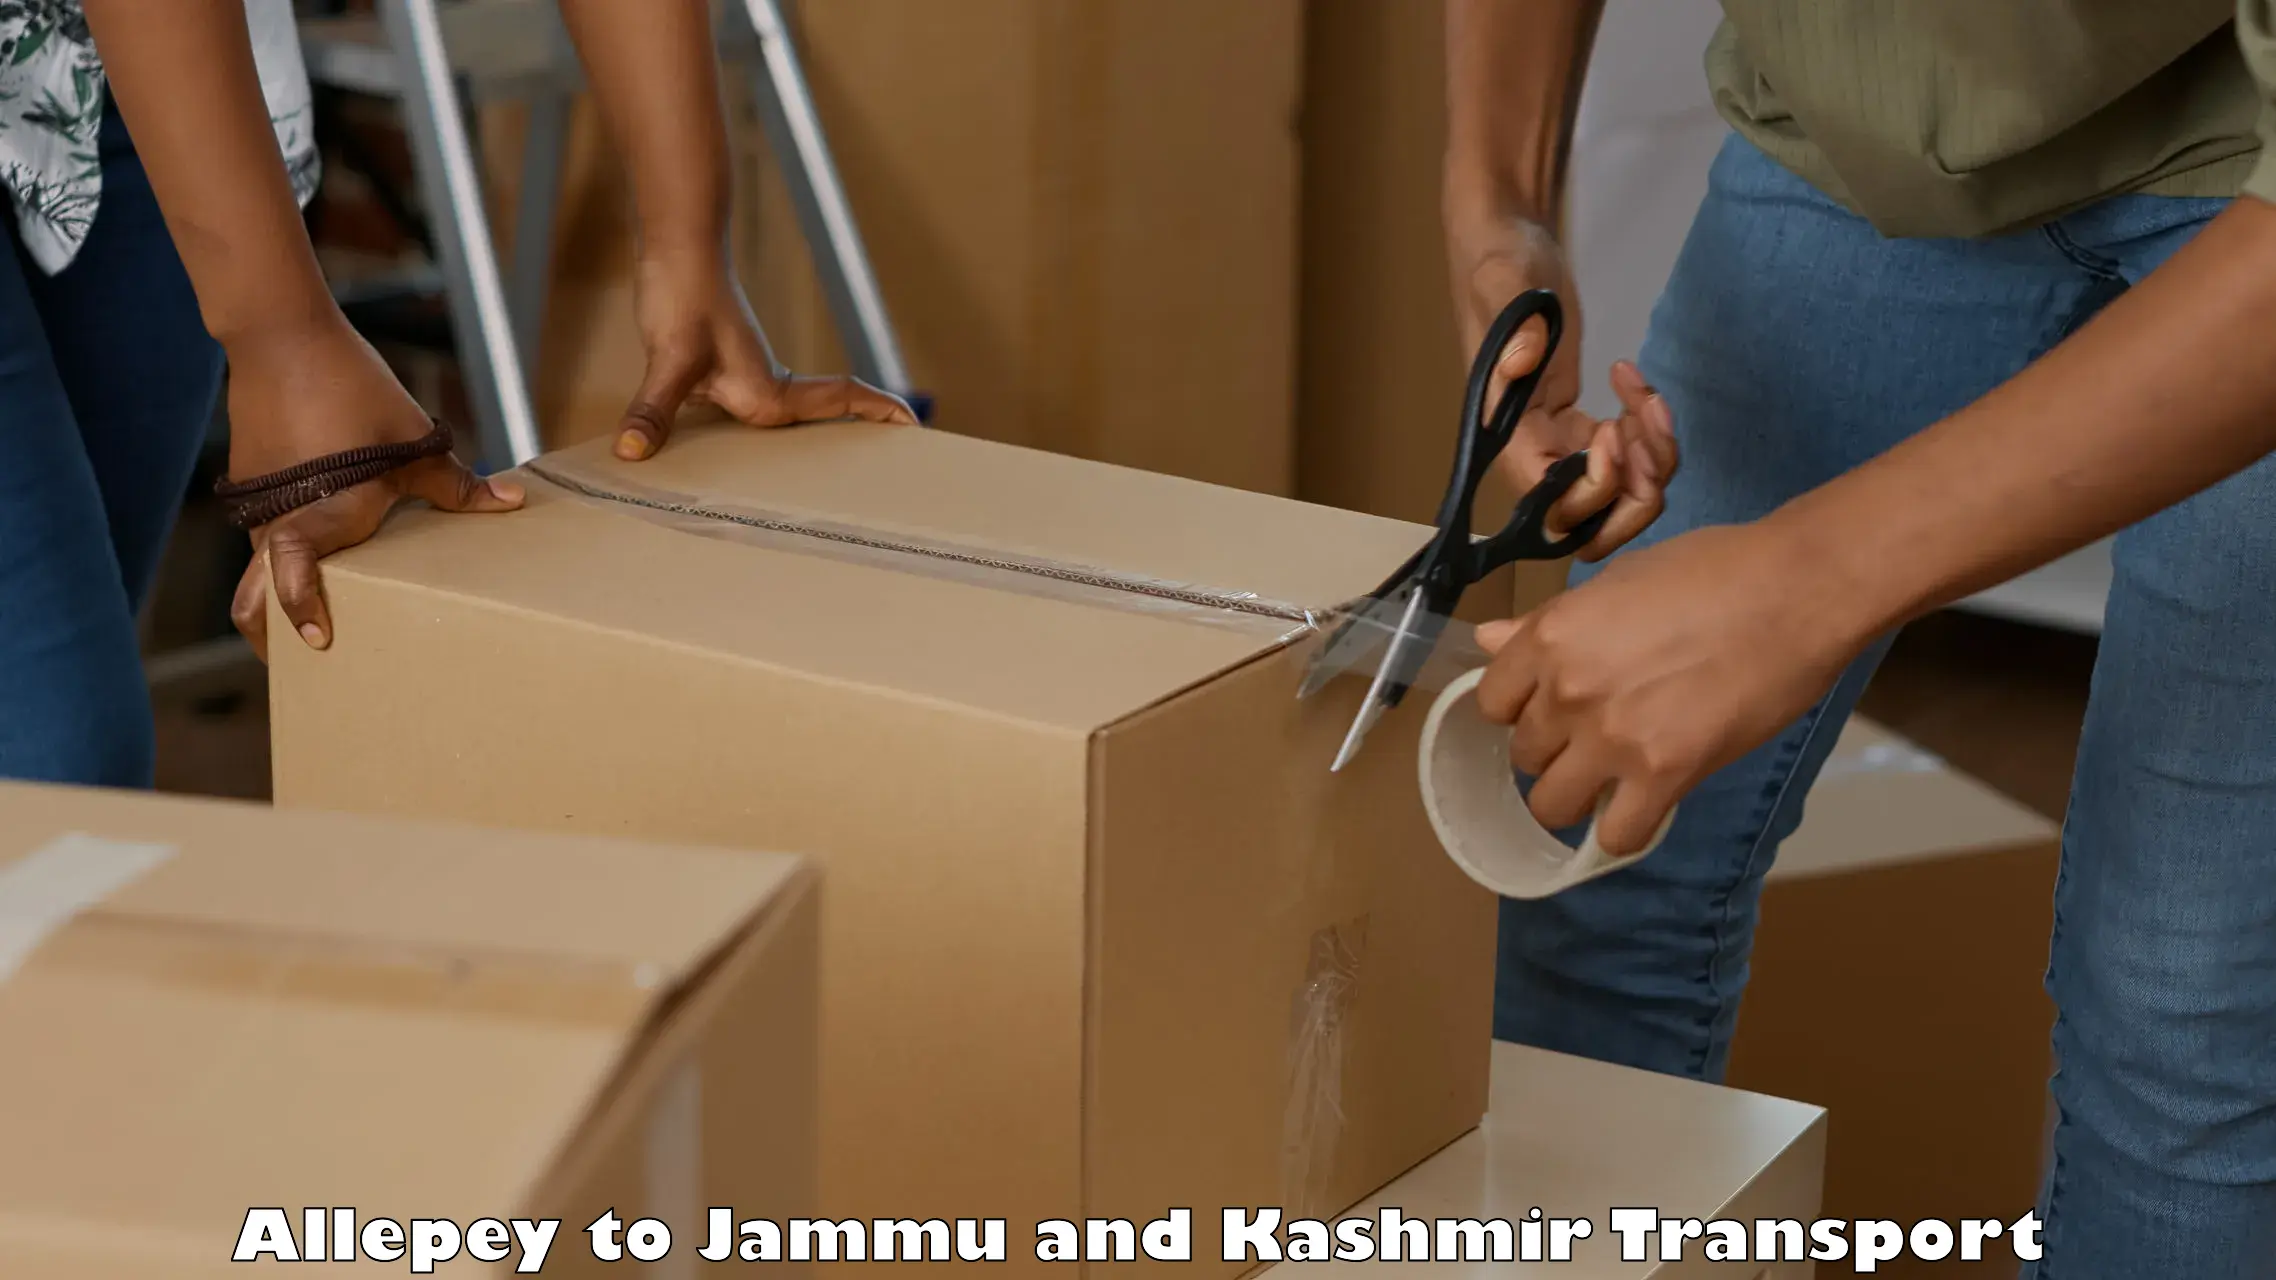 Goods delivery service Allepey to Baramulla